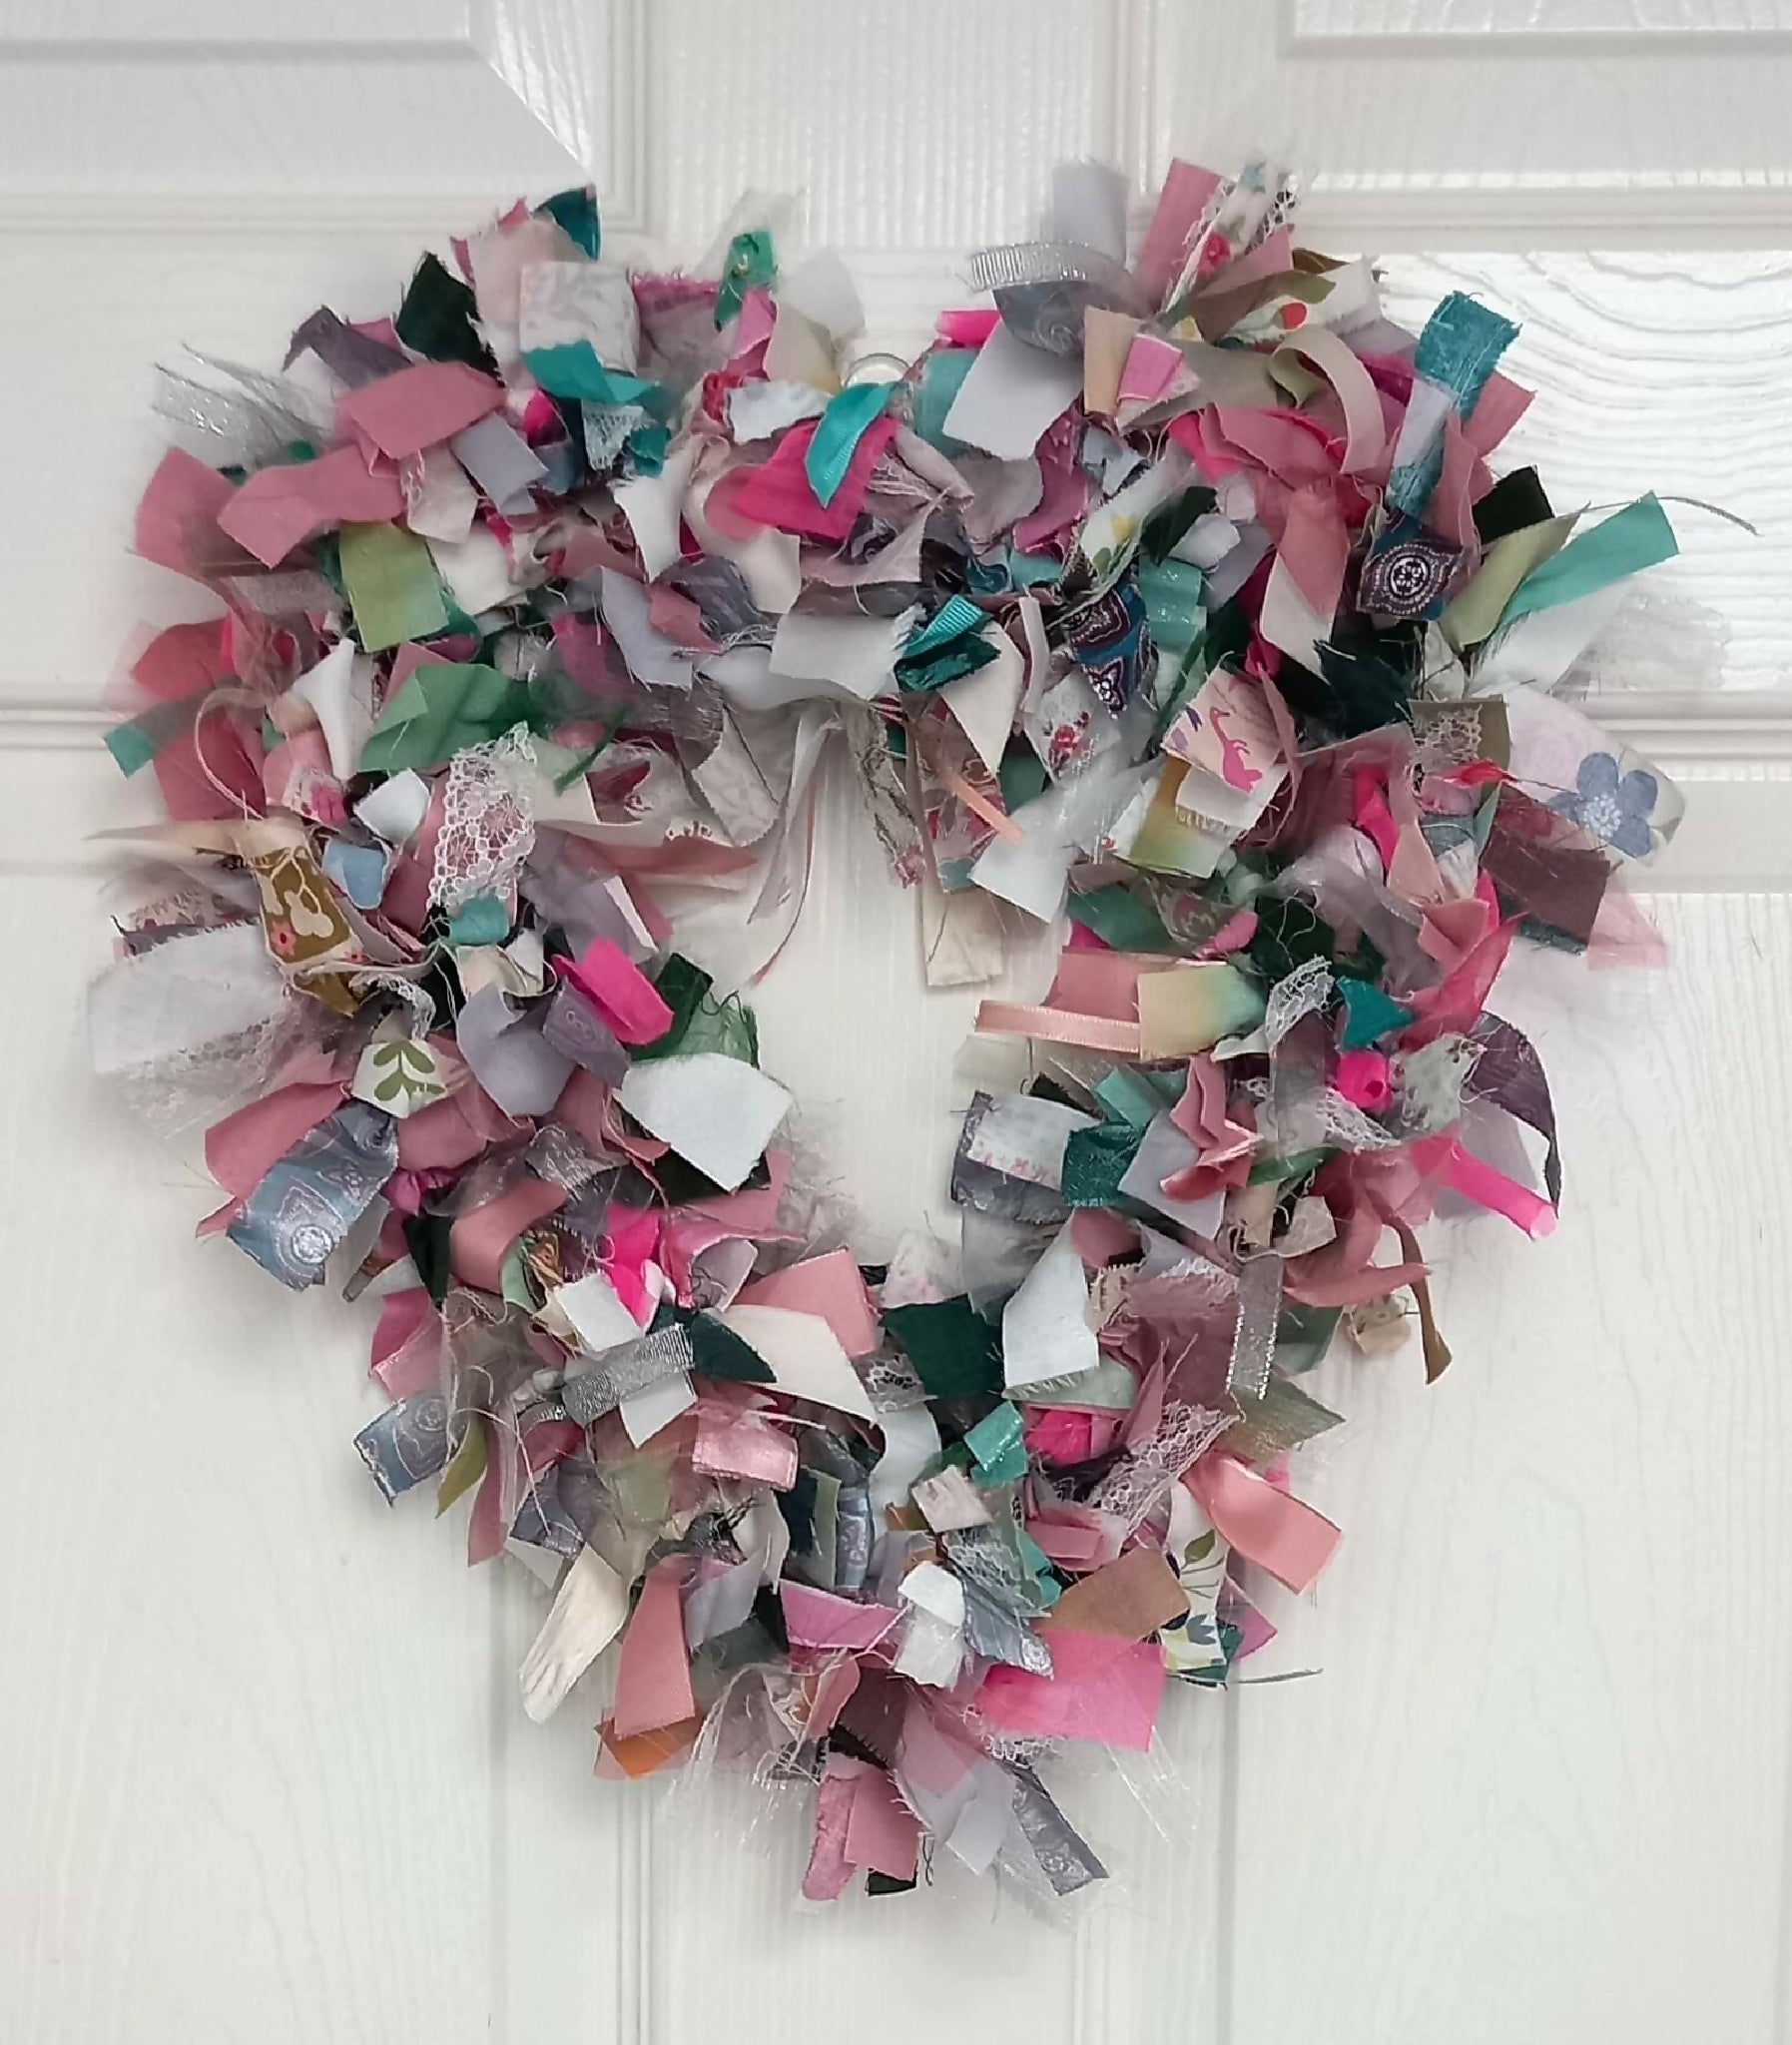 Rag Wreath Heart Shaped in Pinks and Greys